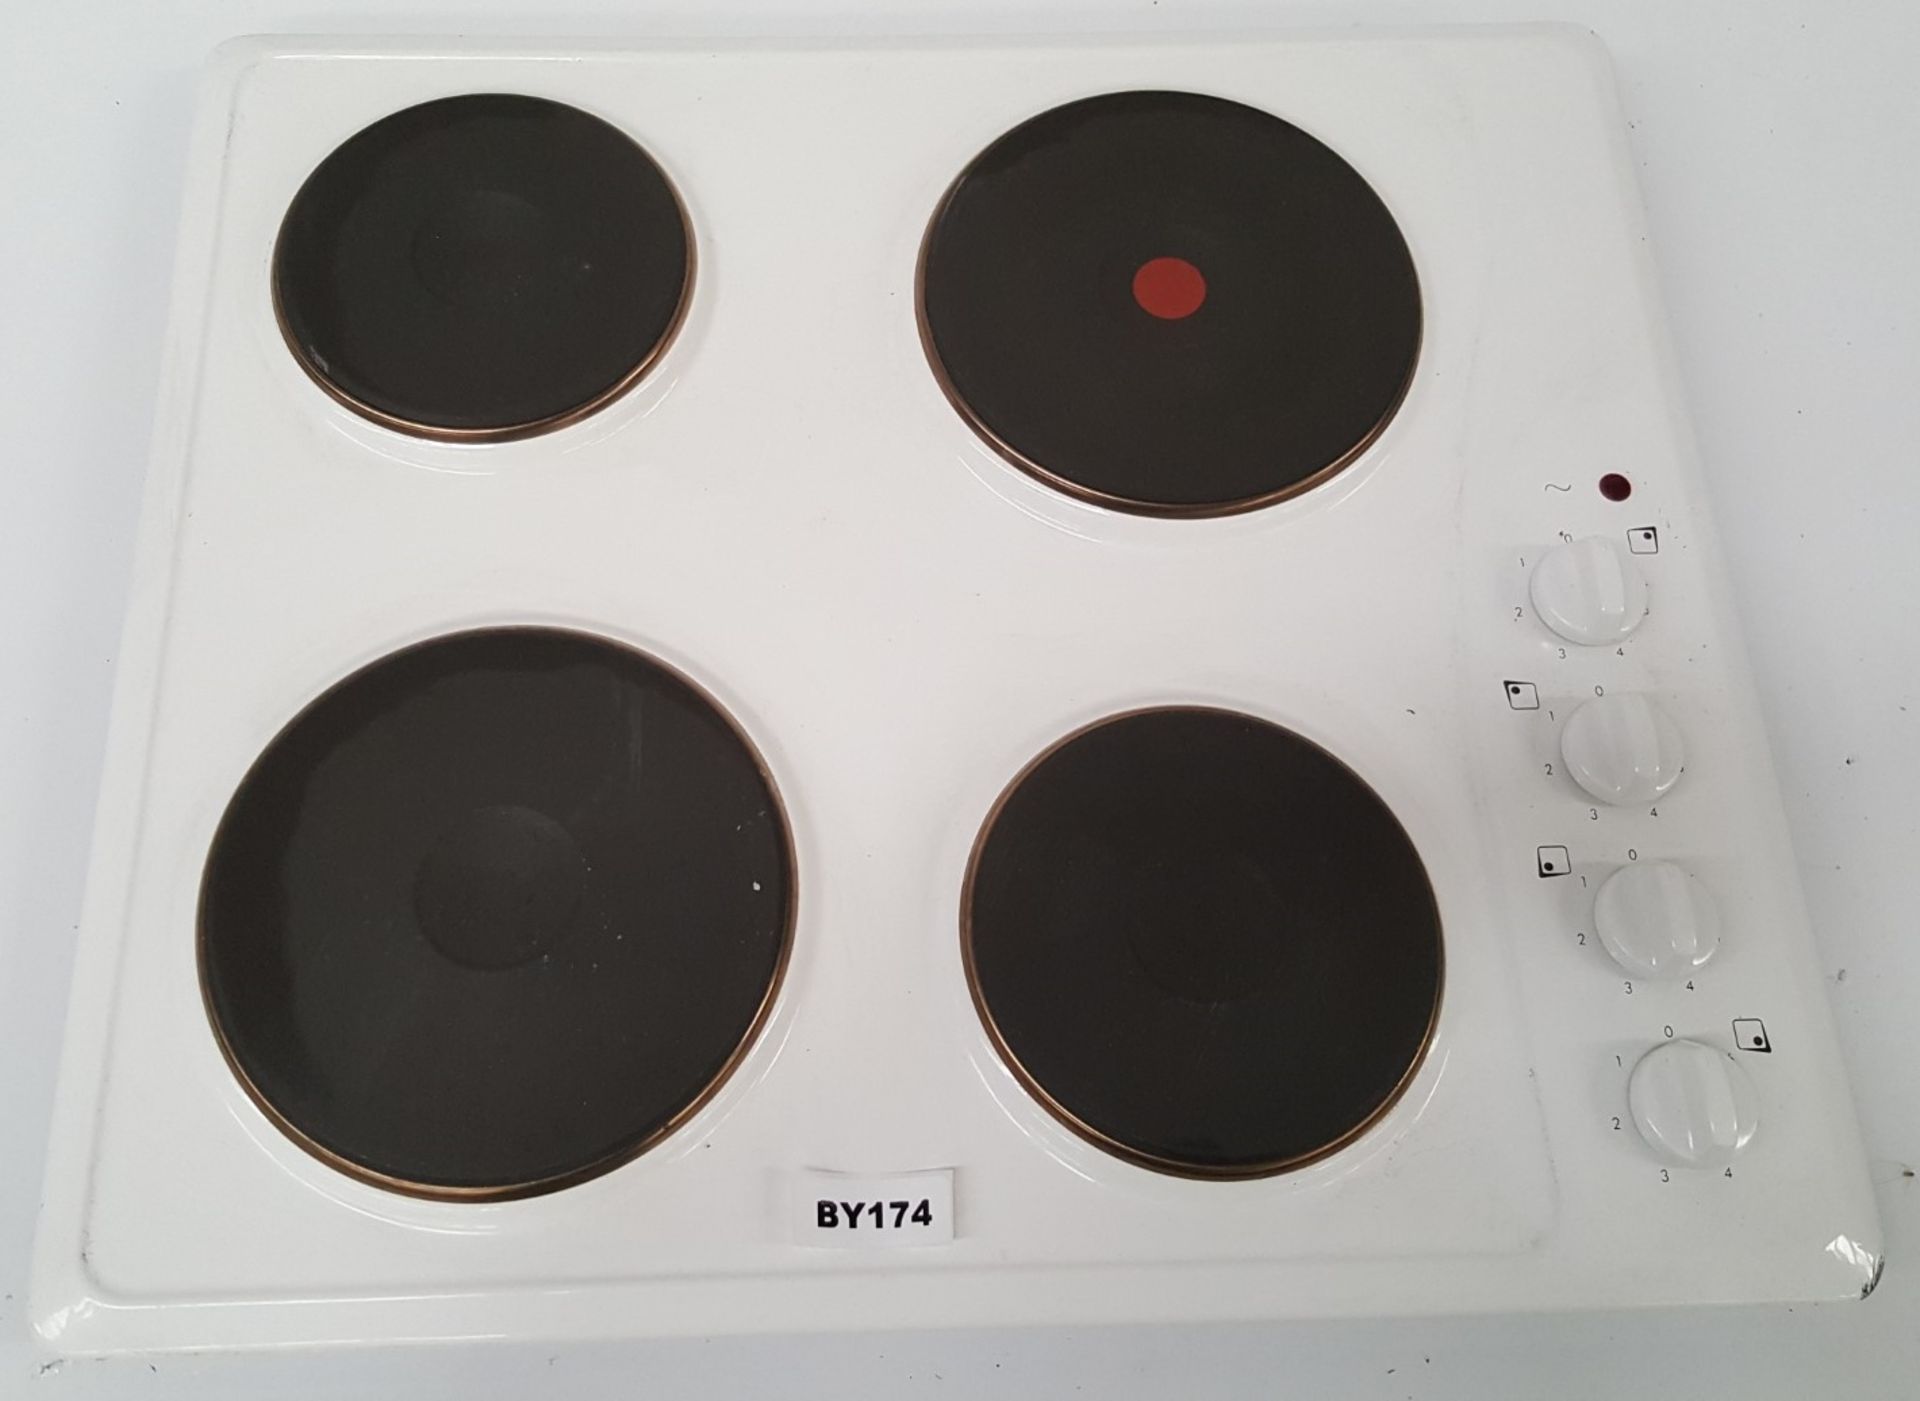 1 x Ignis AKL7000/WH 60 cm Electric Hob White Finish - Ref BY174 - Image 3 of 5